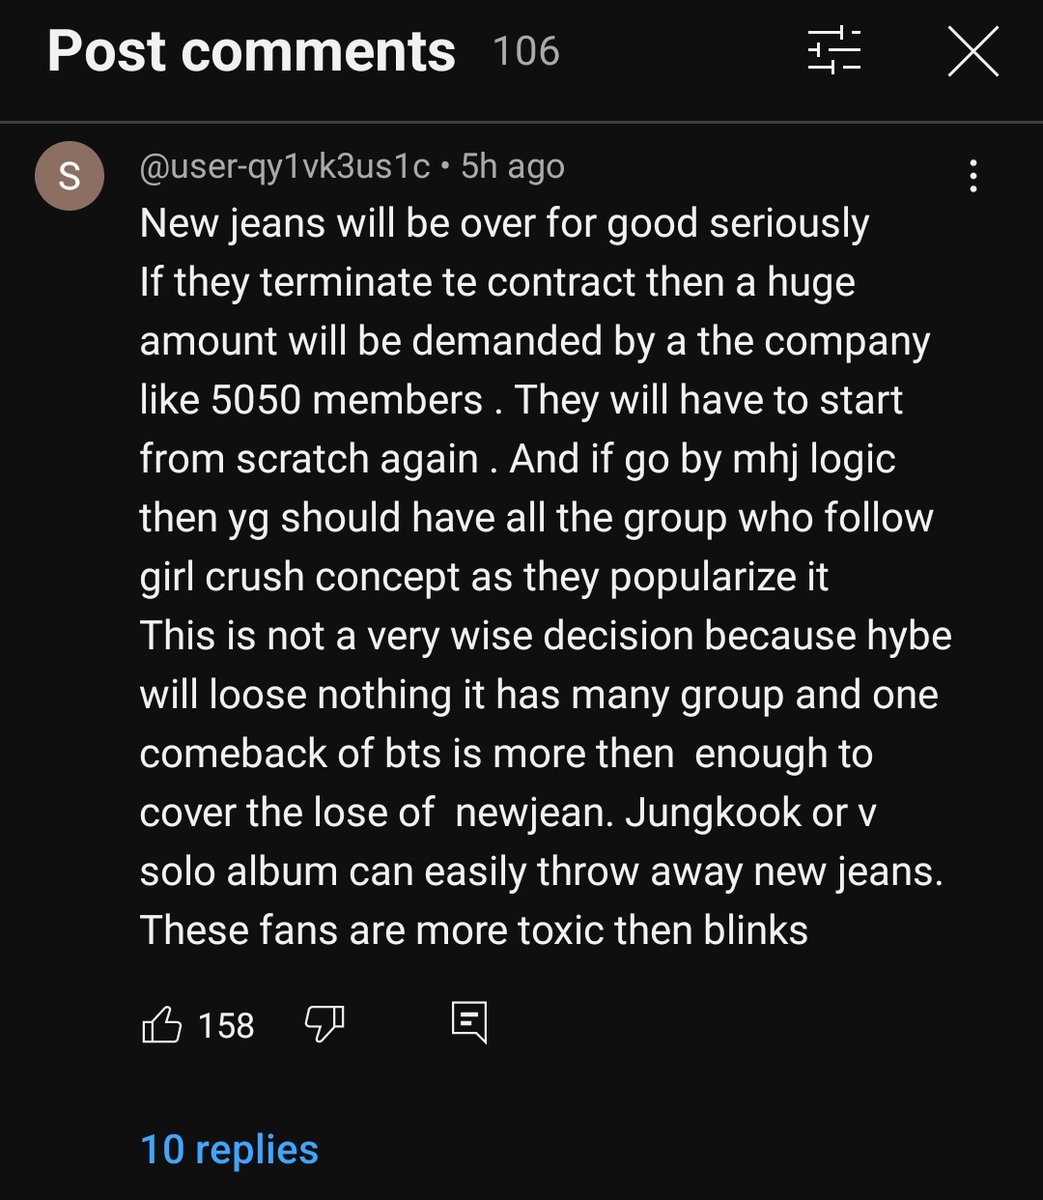 You know that you fvcked up when YouTube k-pop stans start making sense. The fact 'hybe won't lose anything, one comeback of BTS is enough' is so true!